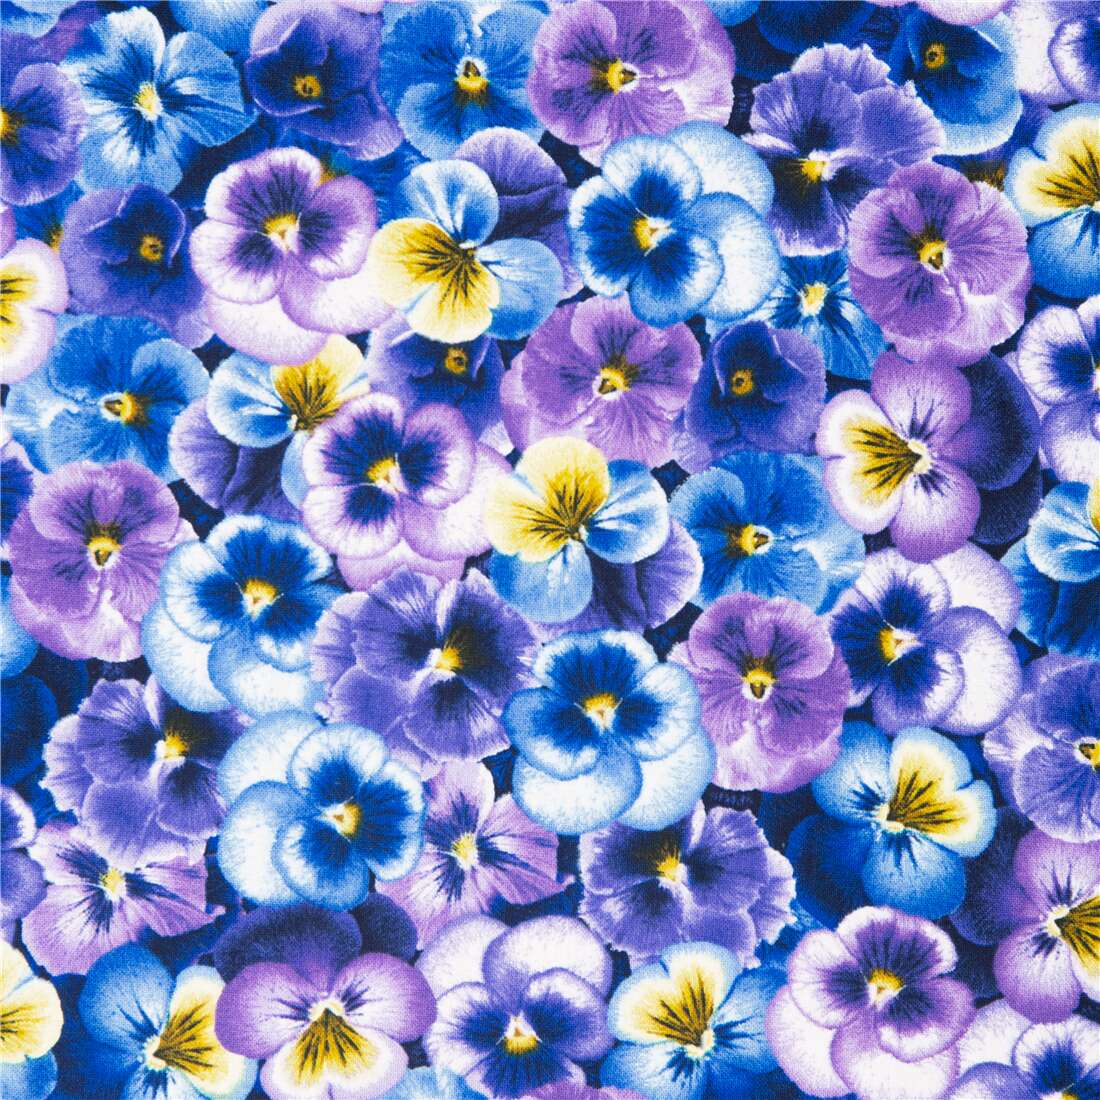 Lovely Pansies Packed Flowers Colorful Pansy Cotton Fabric by the Yard 